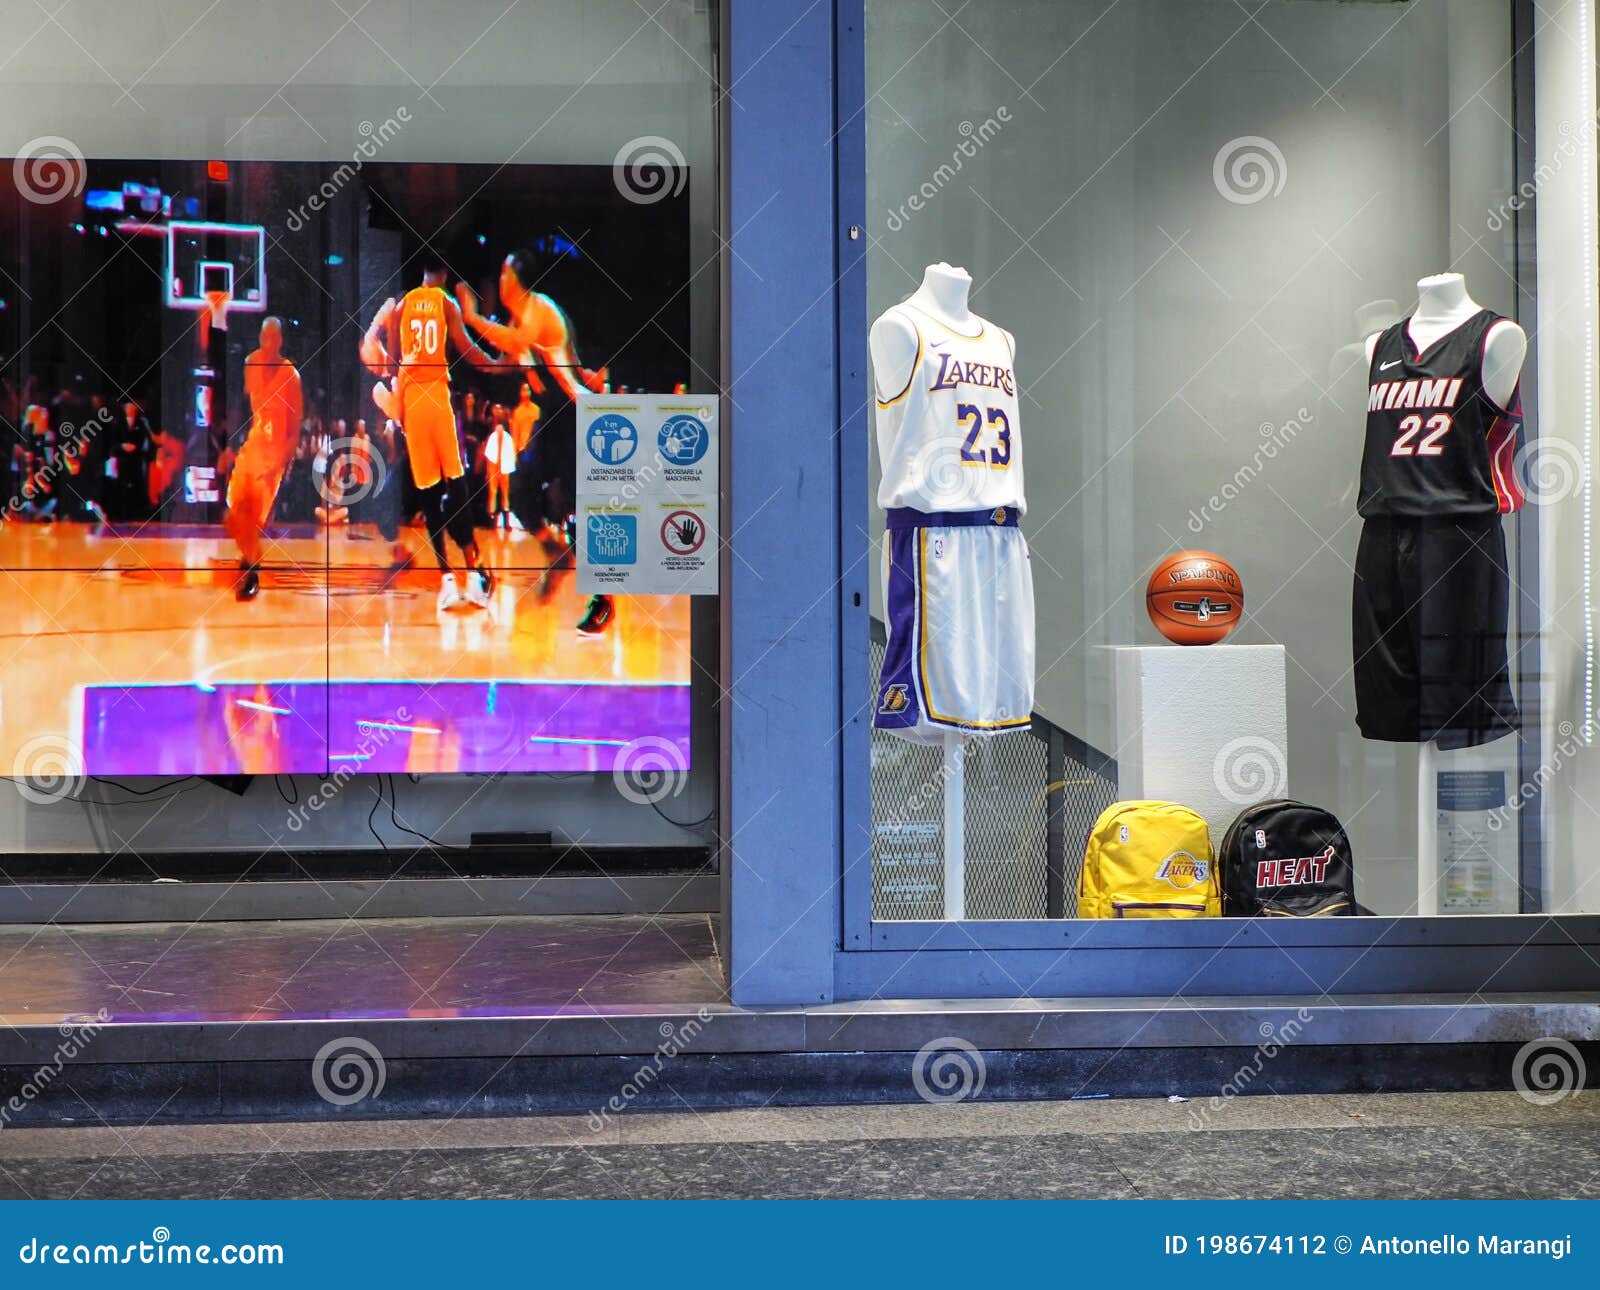 Sporting Goods Store Celebrates NBA Finals by Displaying Game Uniforms of  L.a Editorial Photography - Image of finals, celebrates: 198674132